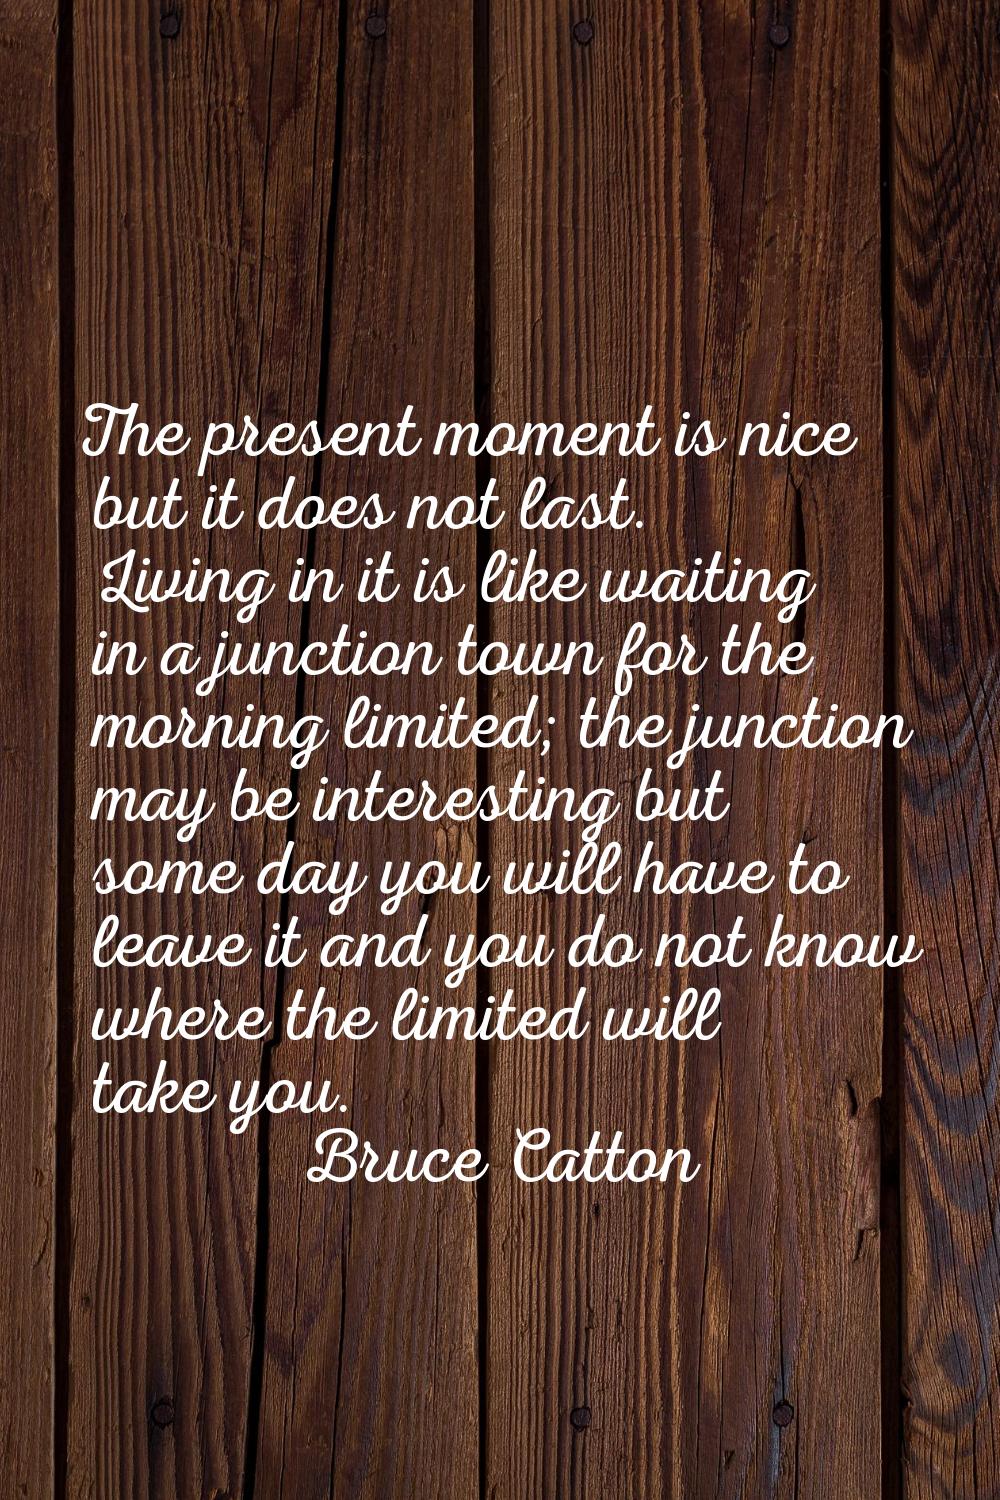 The present moment is nice but it does not last. Living in it is like waiting in a junction town fo